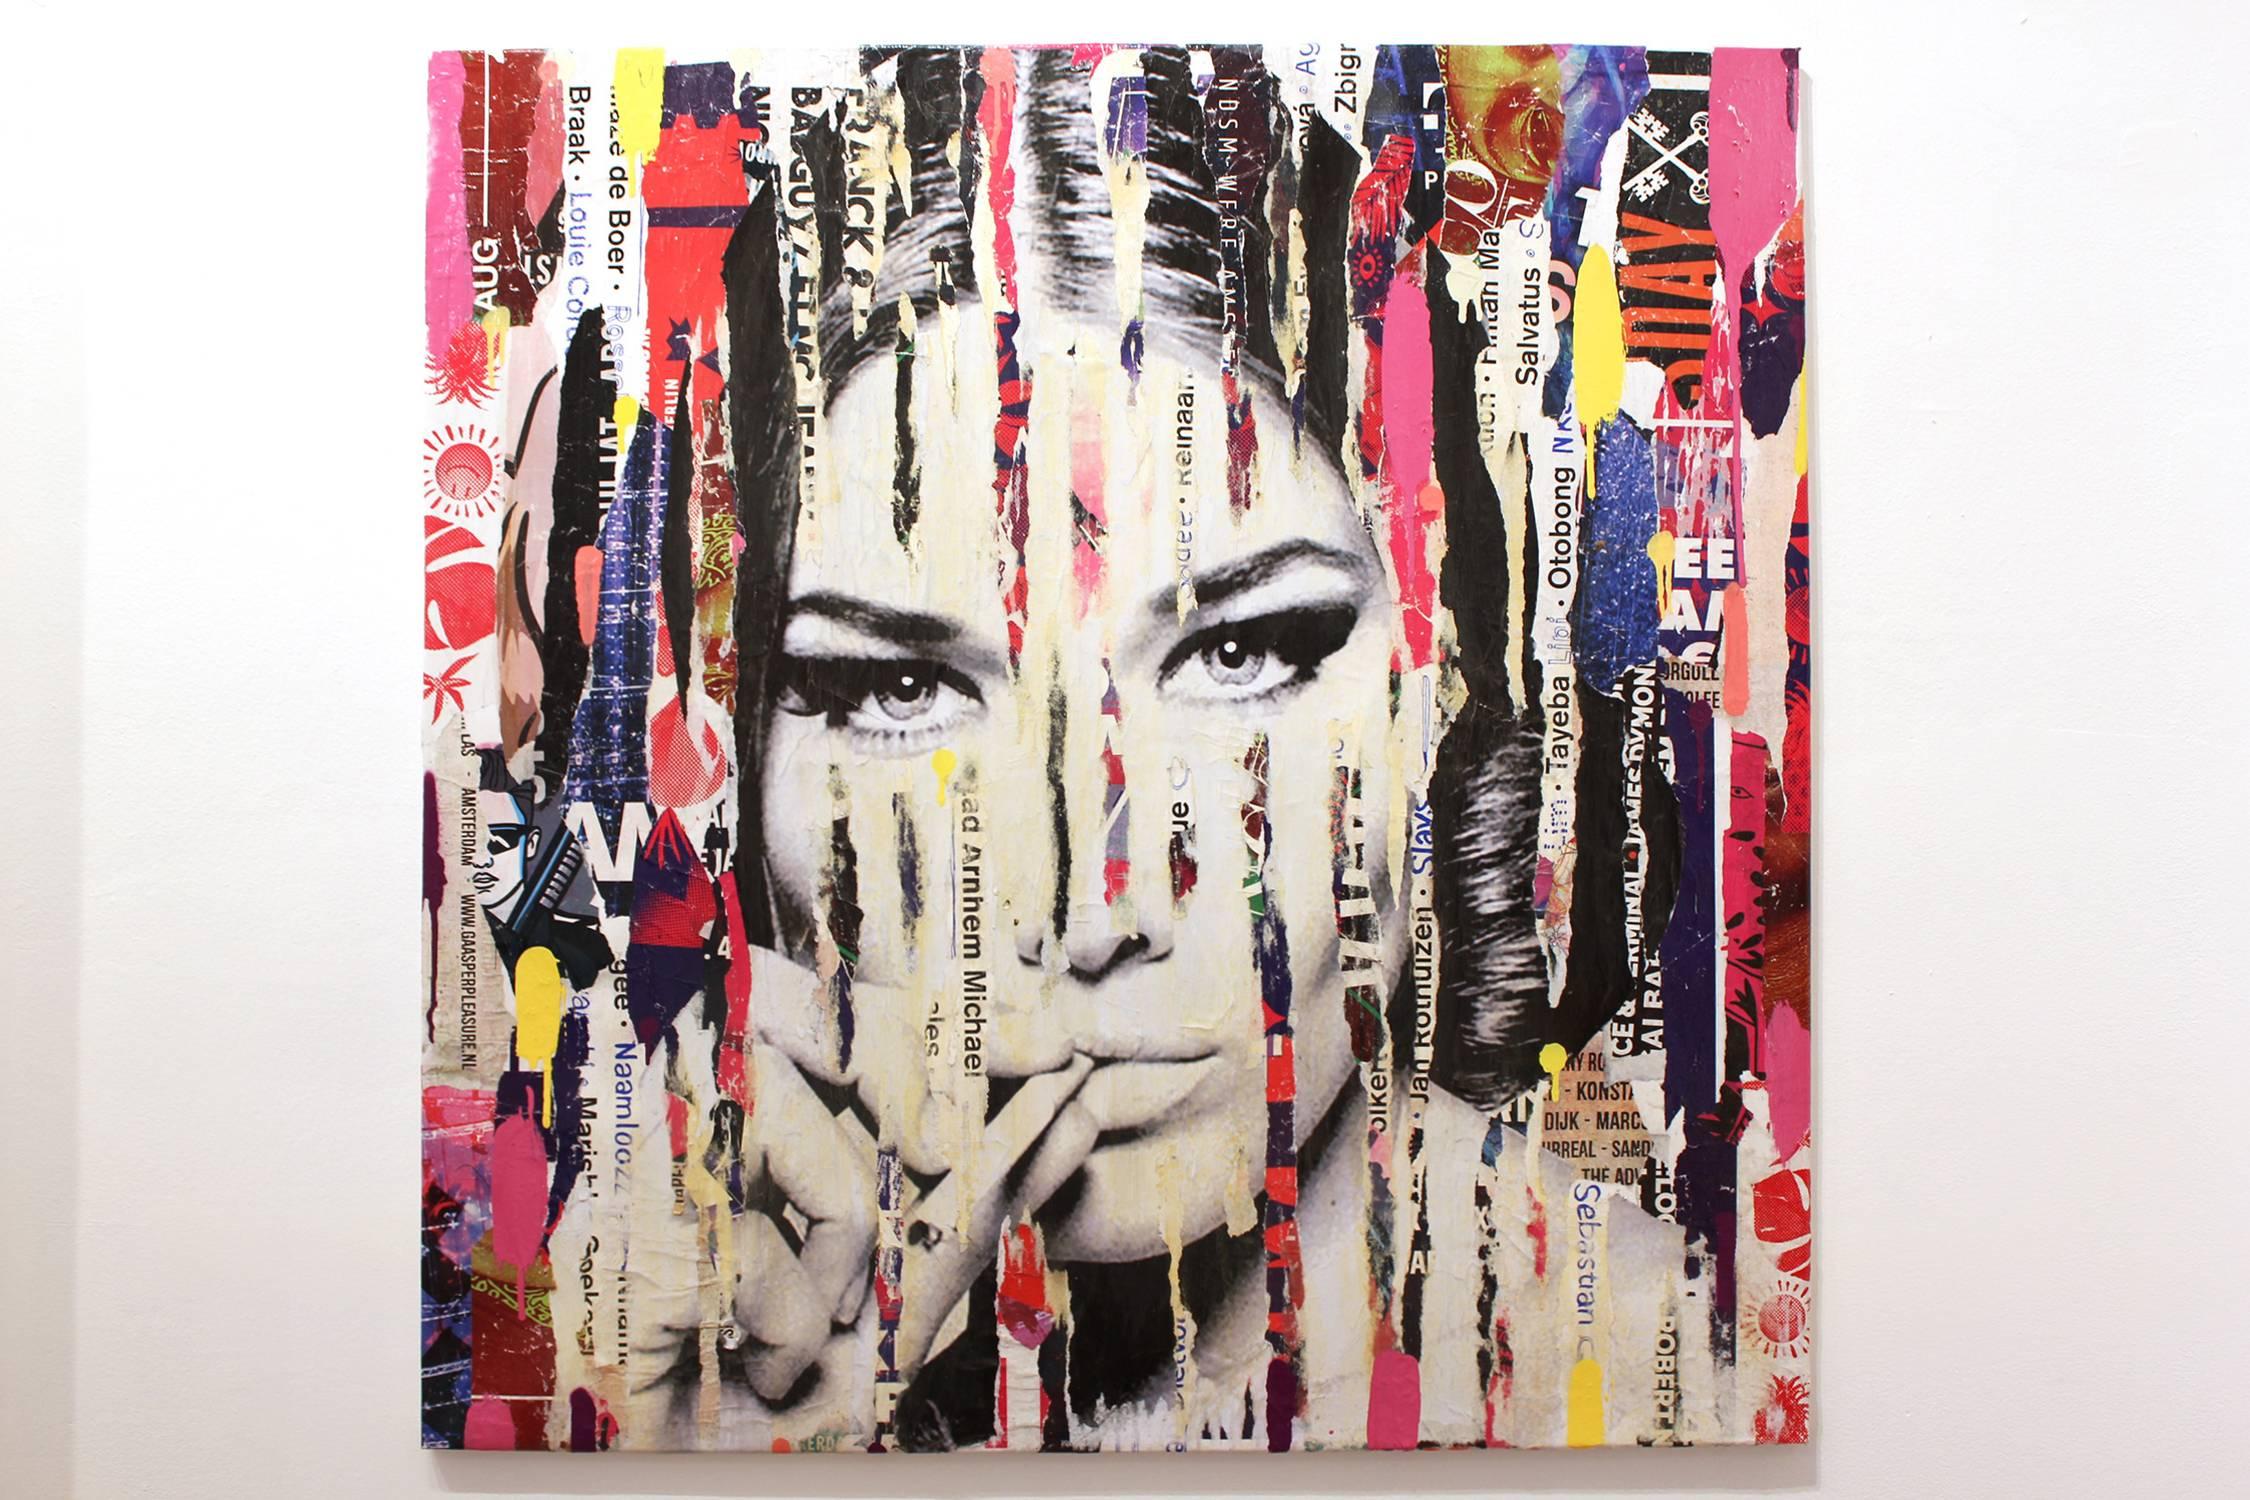 This piece depicts famous Italian-French singer-songwriter and former model Carla Bruni, married to former French president Nicolas Sarkozy. Done with beautiful expressive colors and a distinctive street art design, this piece pops with energy and a